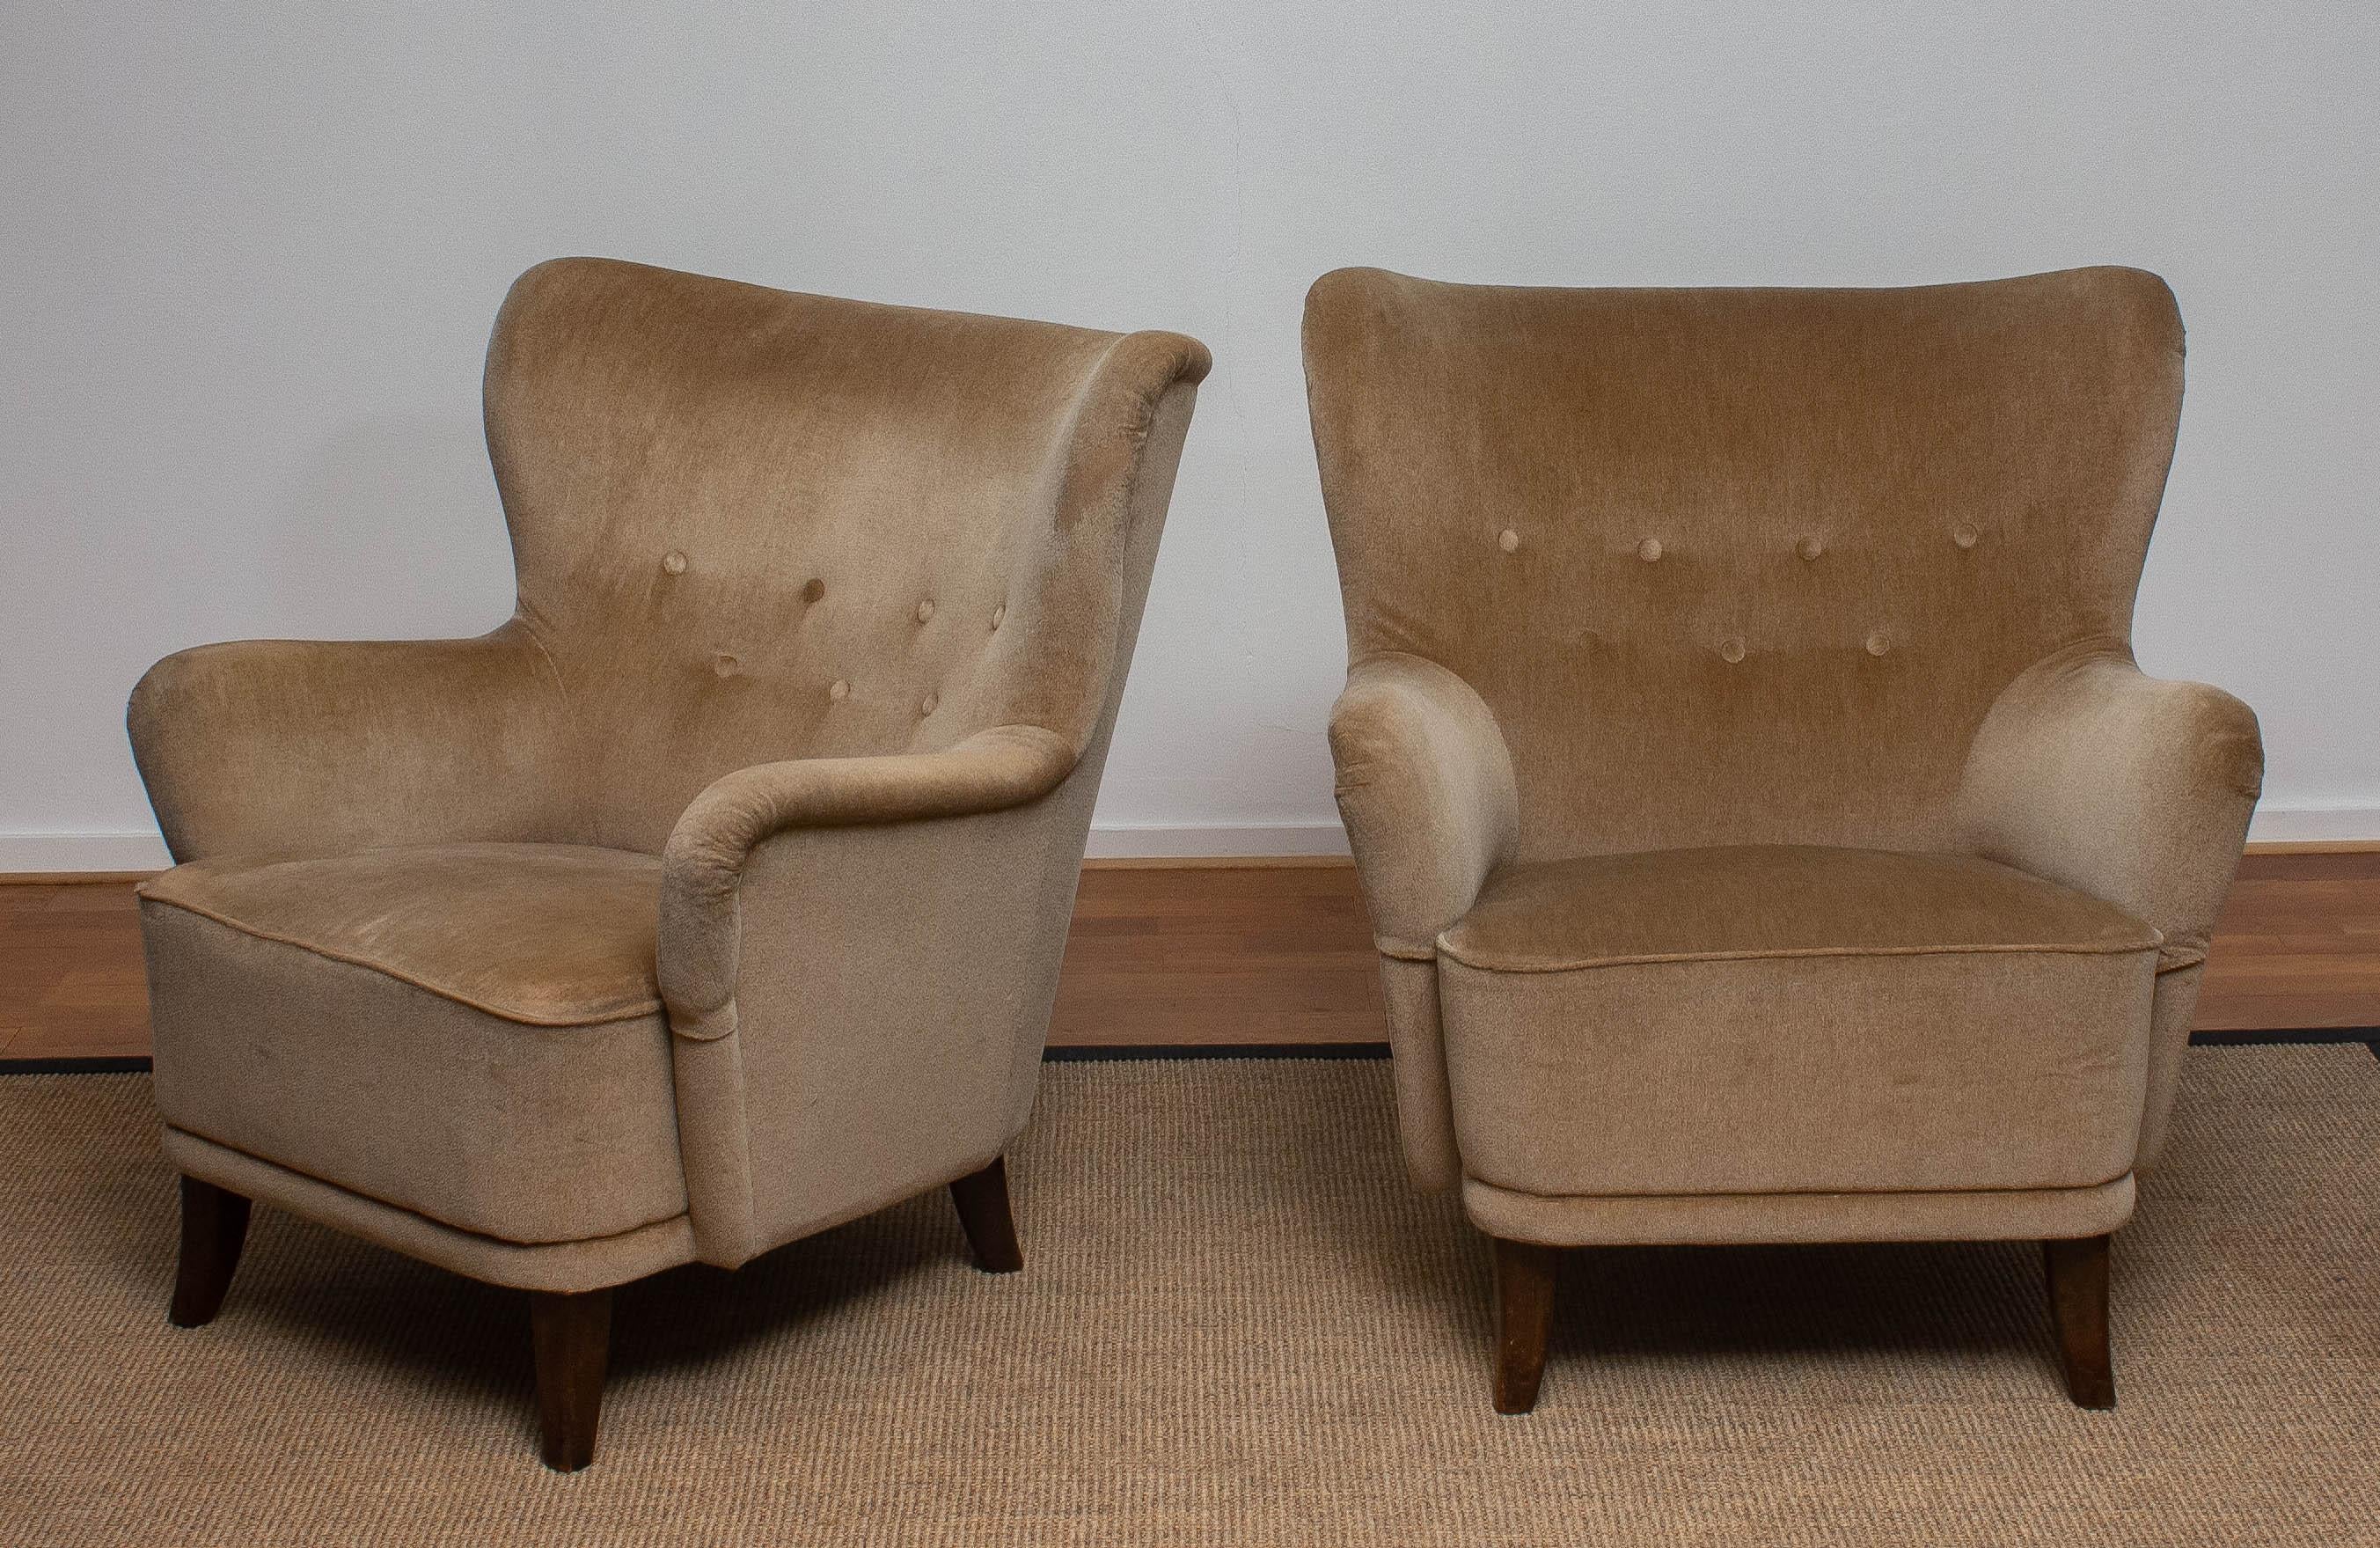 Set of two 1950s lounge or club chairs designed by Ilmari Lappalainen for Asko in Finland.
The chairs are upholstered with beige velvet.
The chairs have some wear spots due to use (see pictures).

  
 